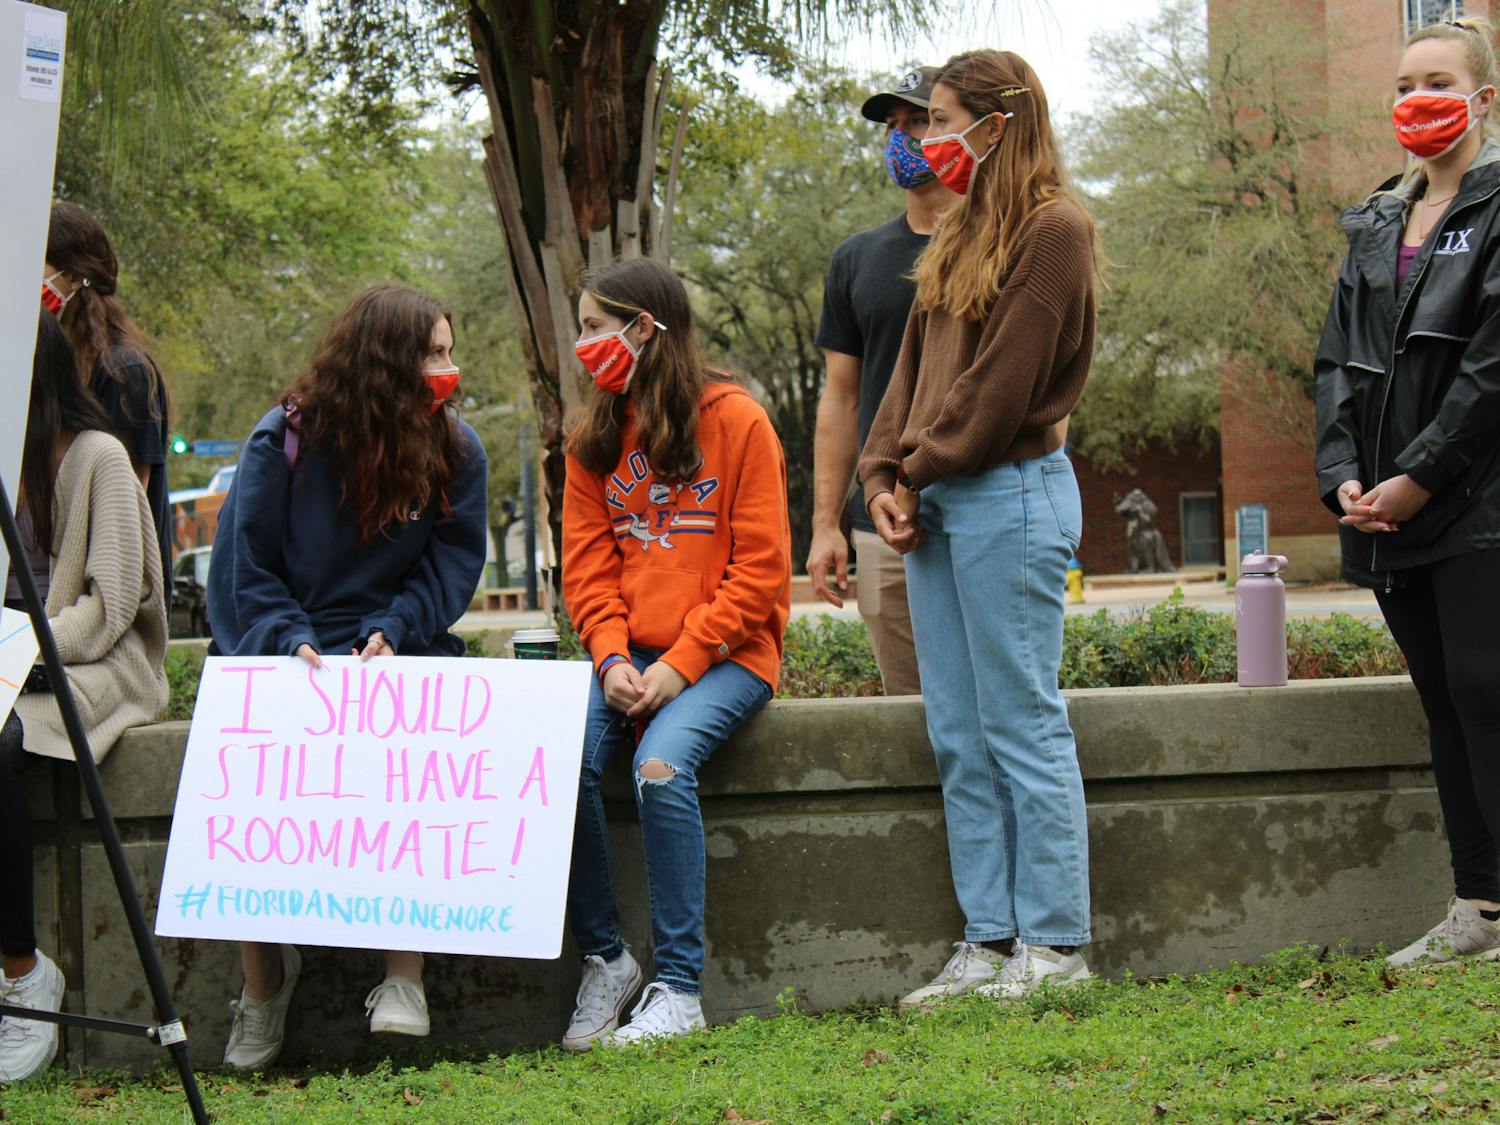 Sydney Kaskin (left), 19, a neuroscience freshman and former roommate of Sophia Lambert holds a sign that says "I should still have a roommate!" as she speaks with another member of the Florida Not One More student group during a press conference on Wednesday, March 3, 2021. The press conference was held by two attorneys representing the families of Sophia Lambert and Maggie Paxton in two wrongful death lawsuits that were recently filed.